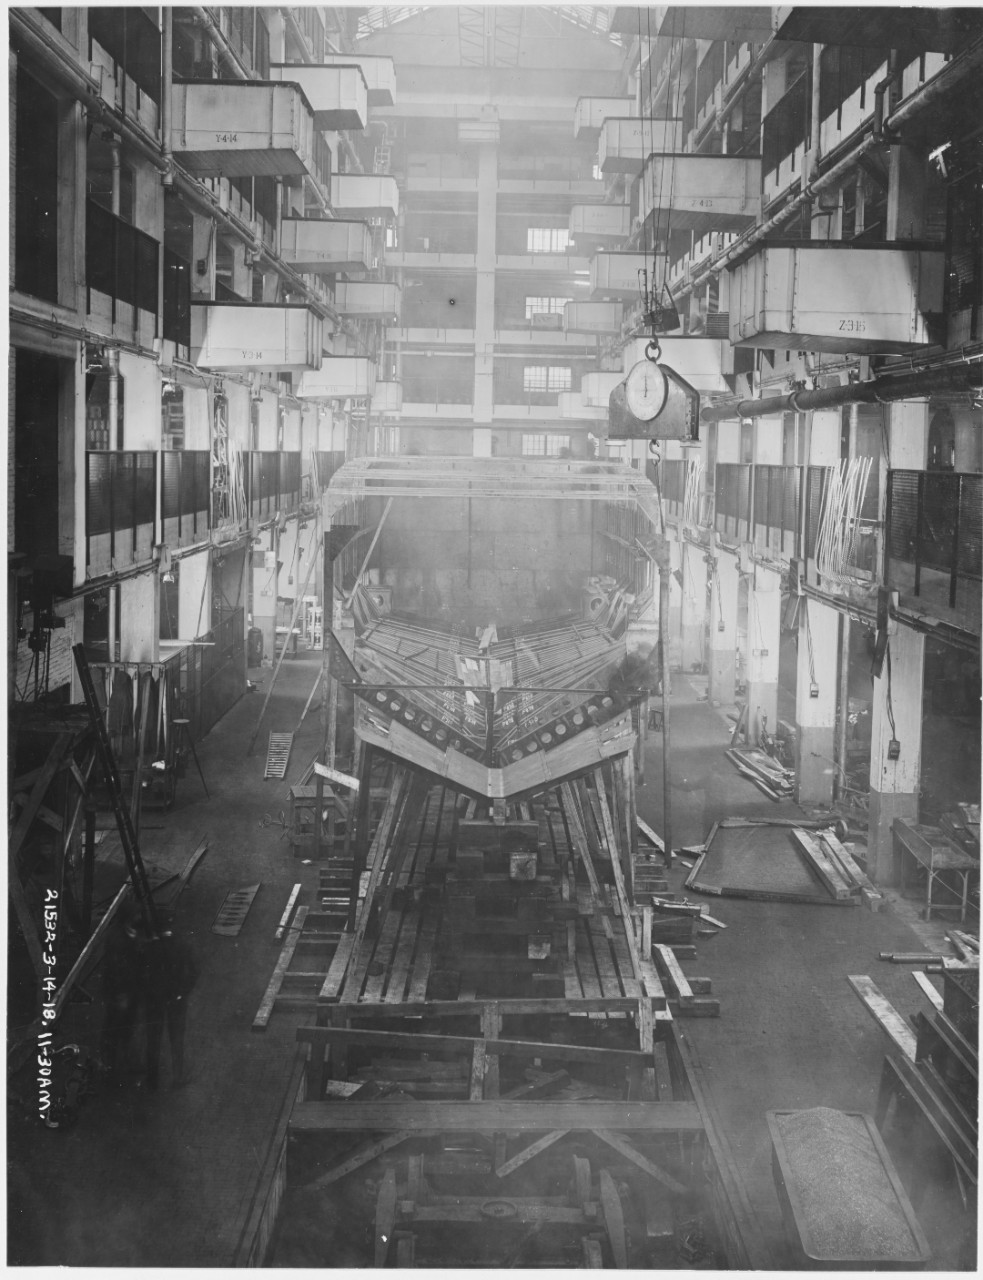 Construction of Ford Eagle Boats, Ford Motor Company, March 14, 1918